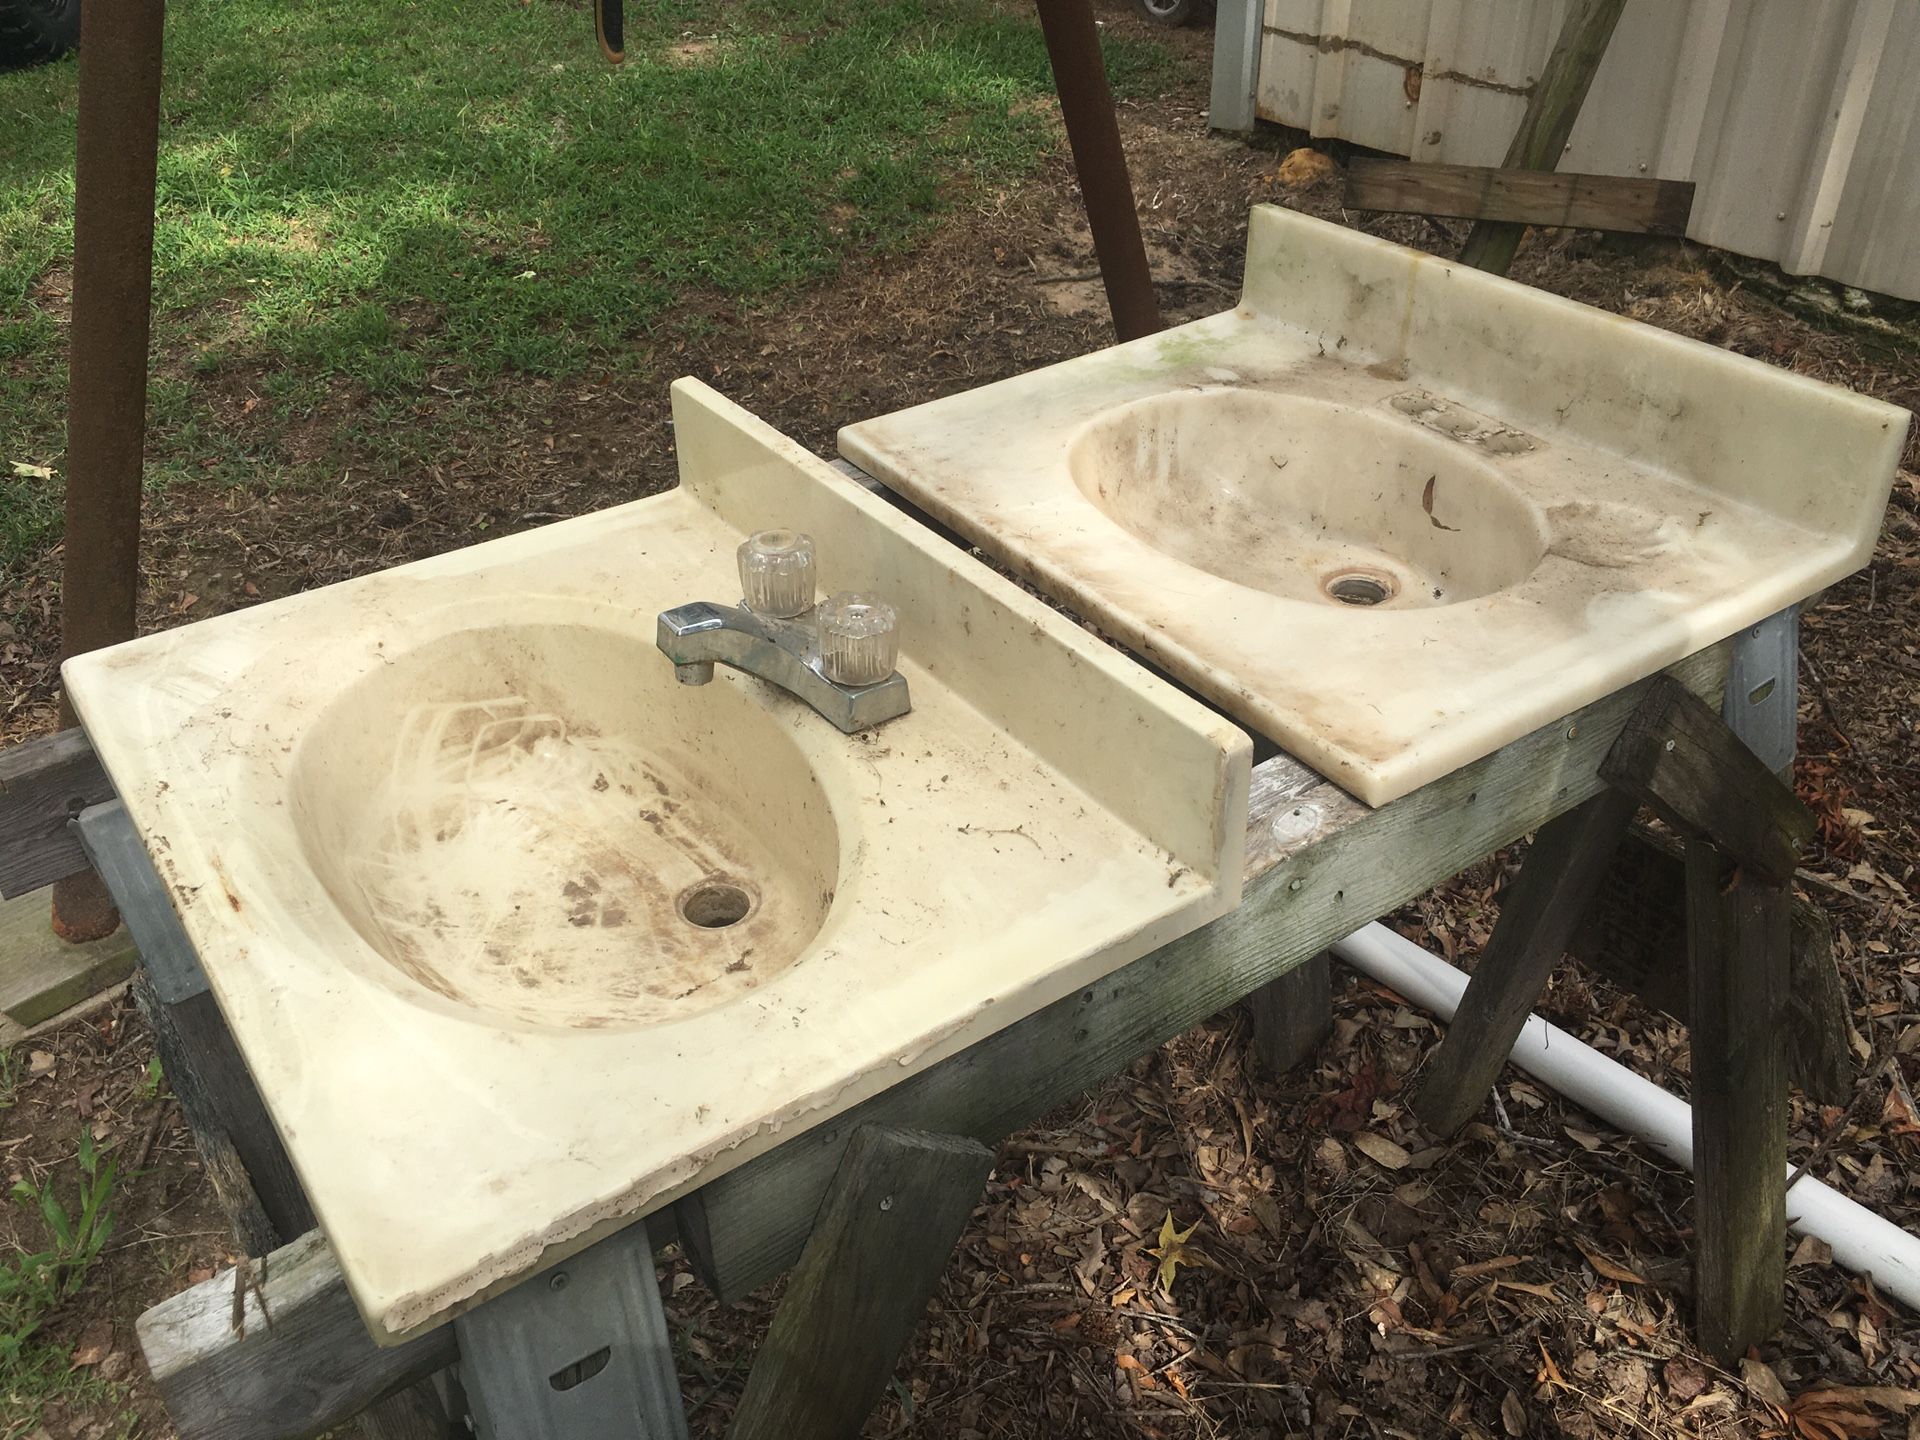 2 sinks Going to the Dump SOON